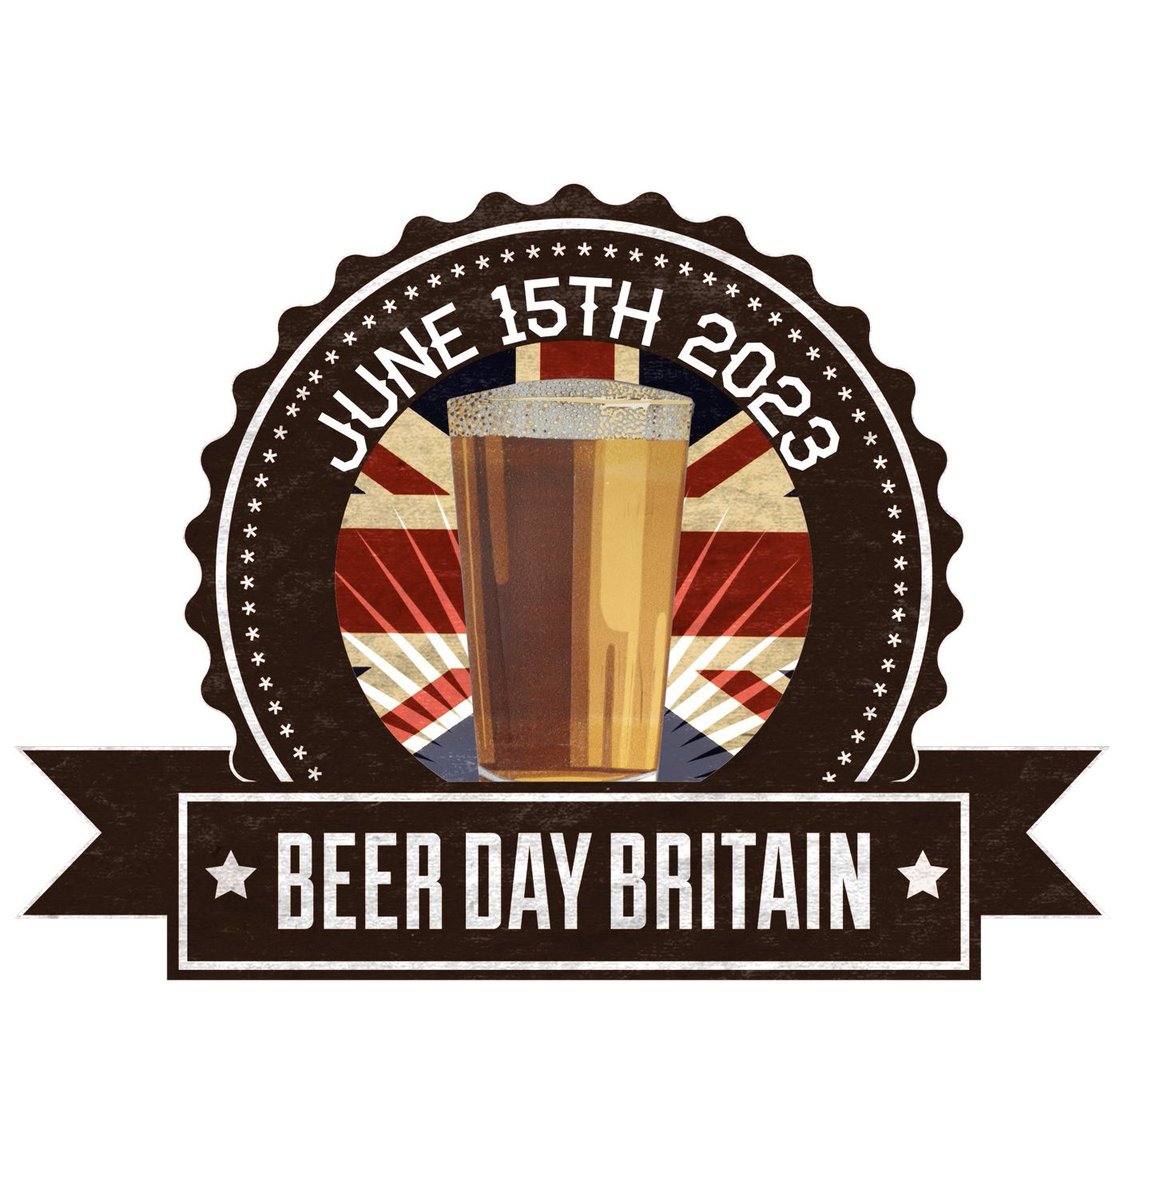 Today is @BeerDayBritain, the UK’s national day to celebrate #beer - and there’s no better way to do that than in a #pub!

Join the #cheerstobeer toast at 7pm (19:00h) tonight. 

Tag us in your pub #BeerDayBritain photos! 🍻

#beer #SupportOurPubs #BackOurBrewers #pubs